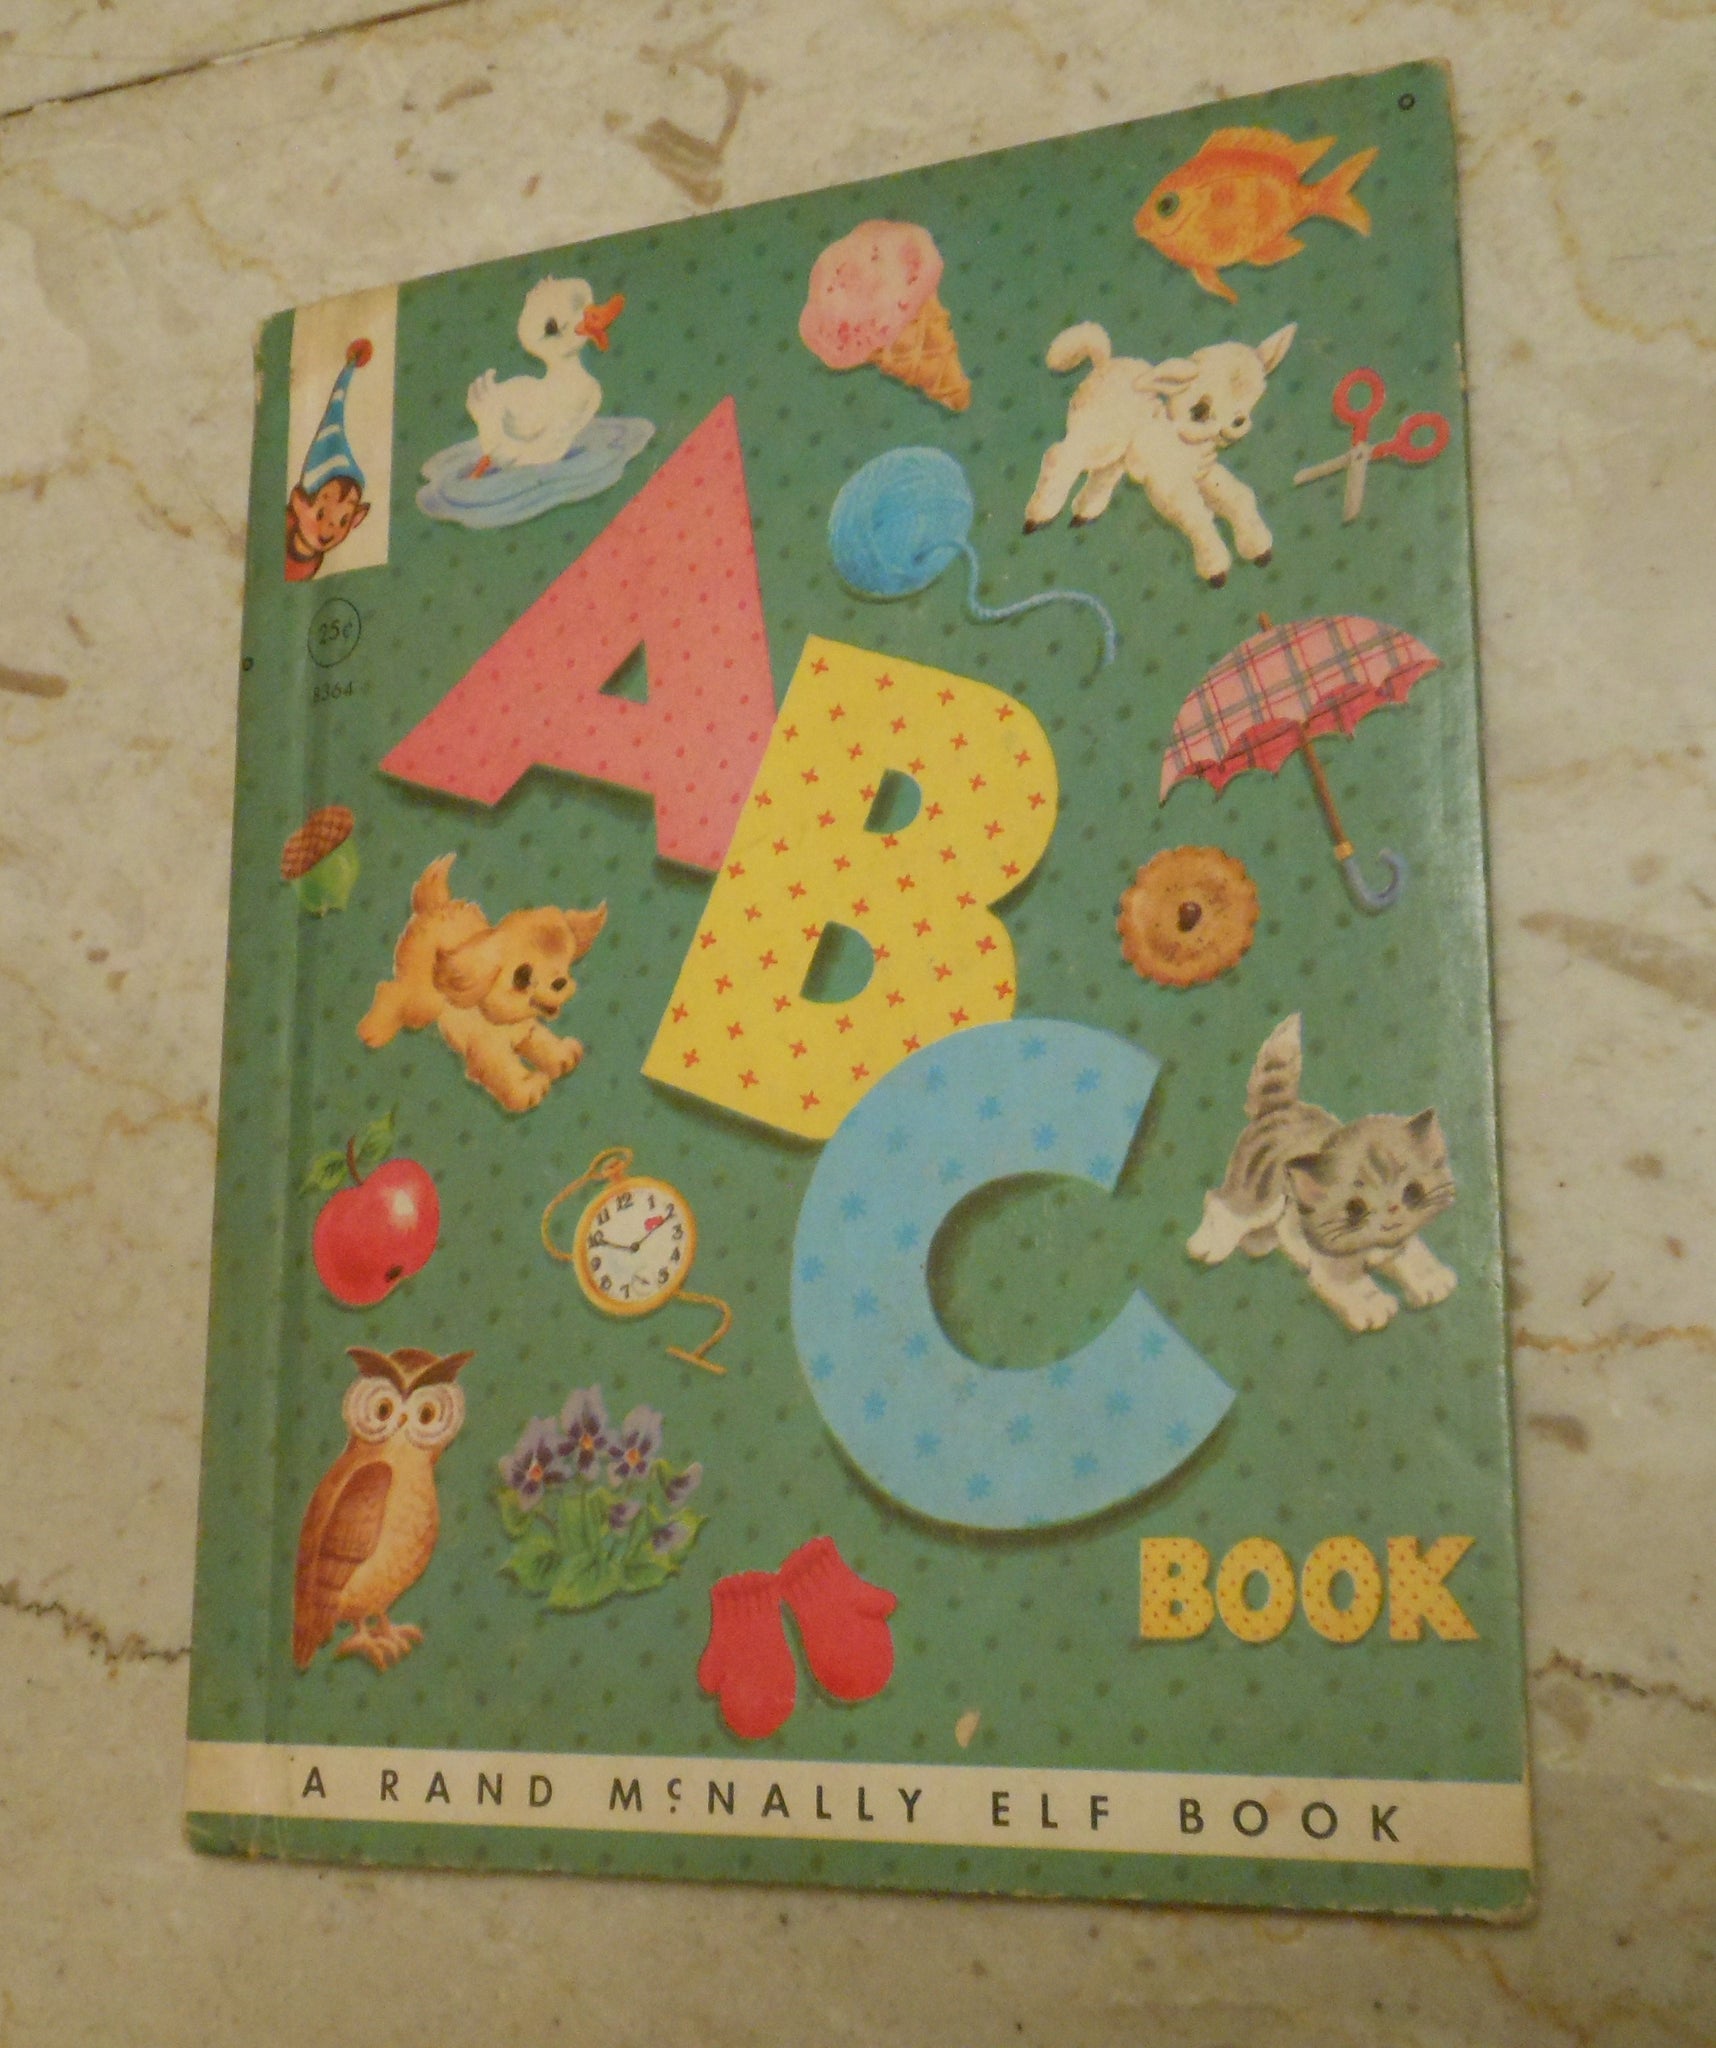 ABC Book Illustrated by Dean Bryant